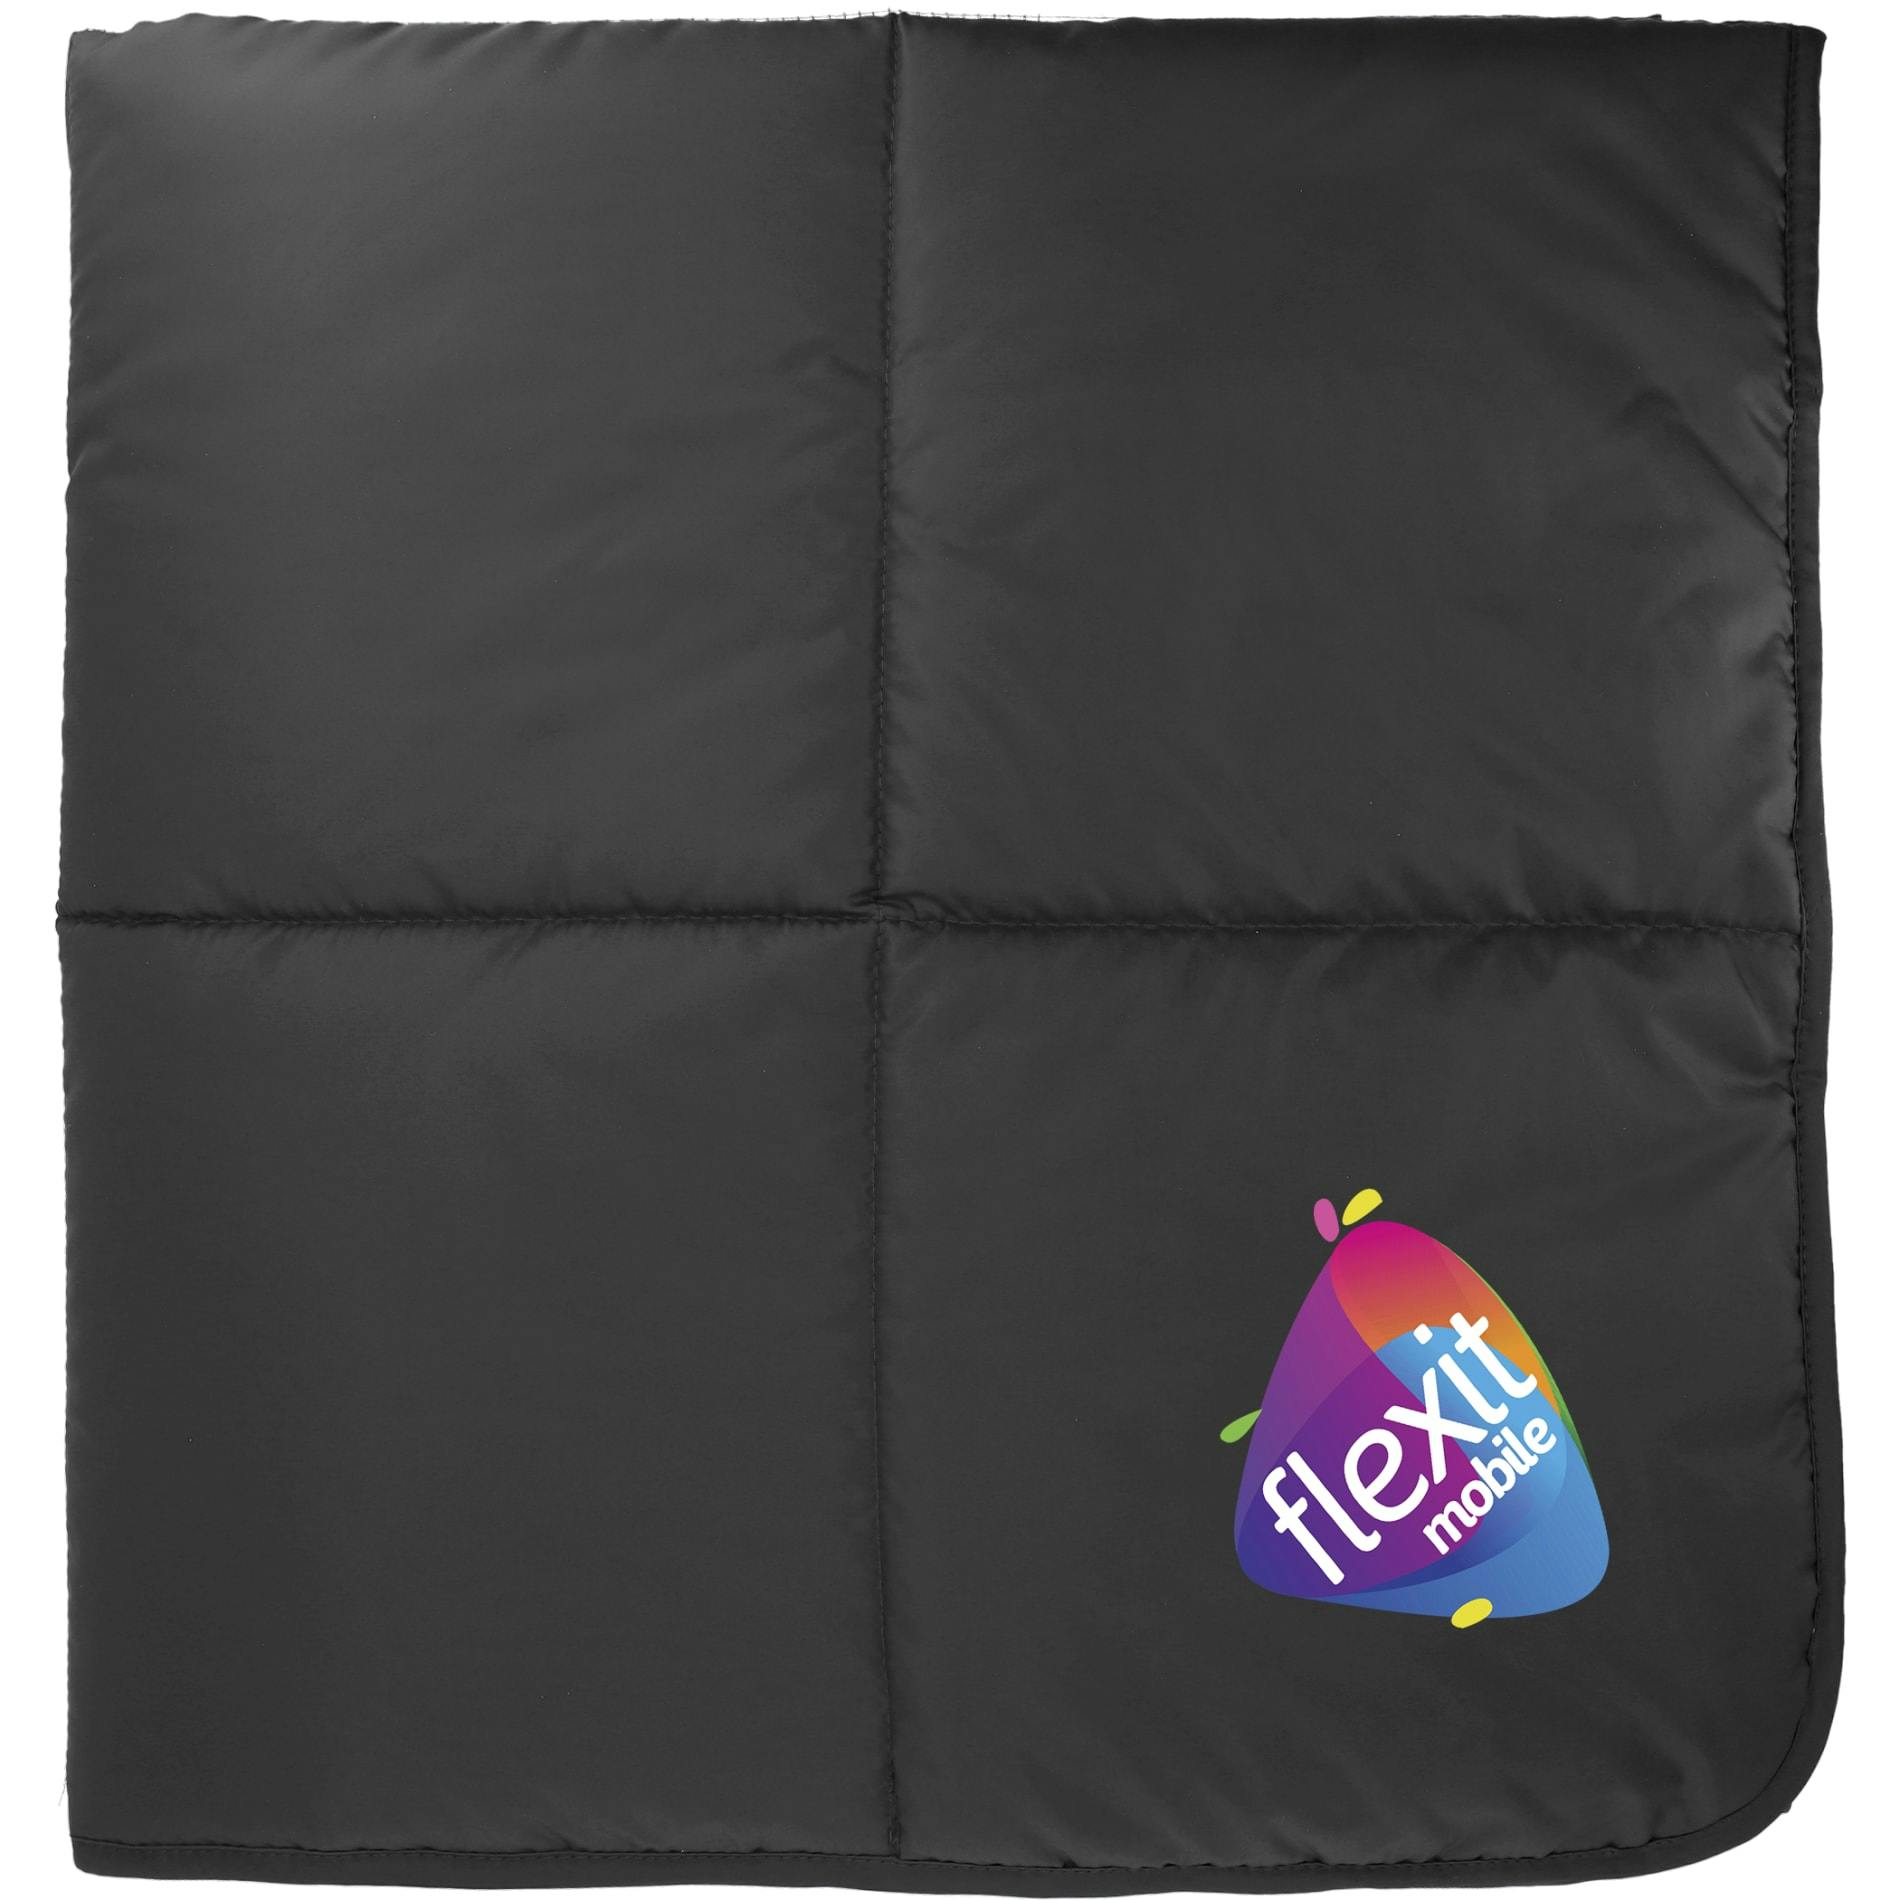 Puffy Outdoor Blanket - additional Image 3